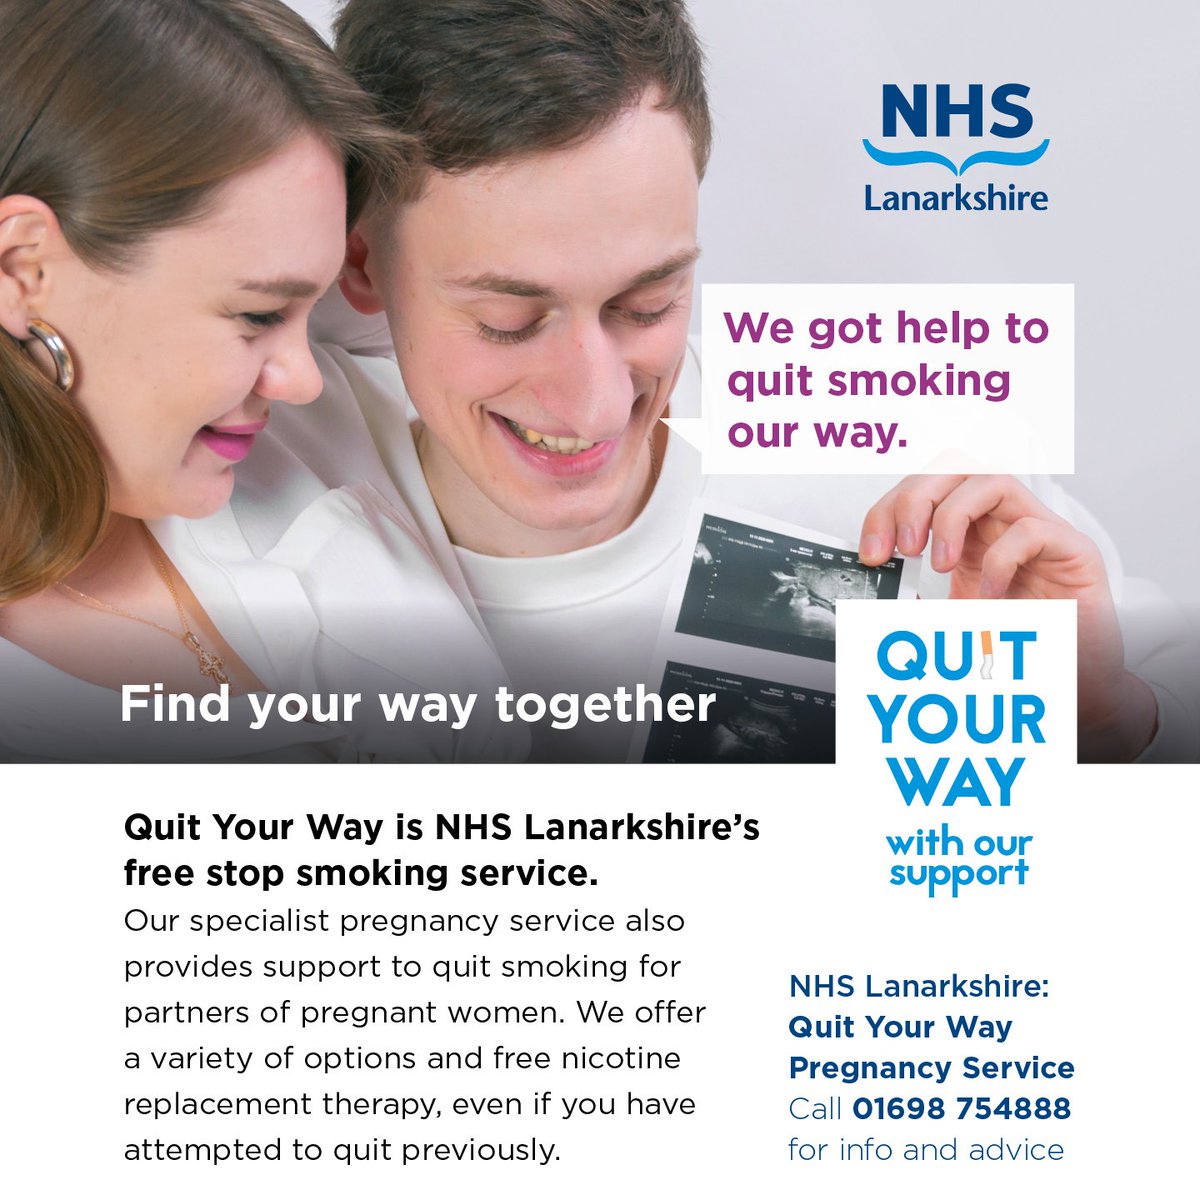 Exposure to other people’s smoke increases a child’s risk of meningitis, chest infections, asthma and developmental problems. For more information and support to quit smoking call 0800 84 84 84 or visit nhslanarkshire.scot.nhs.uk/services/quit-…